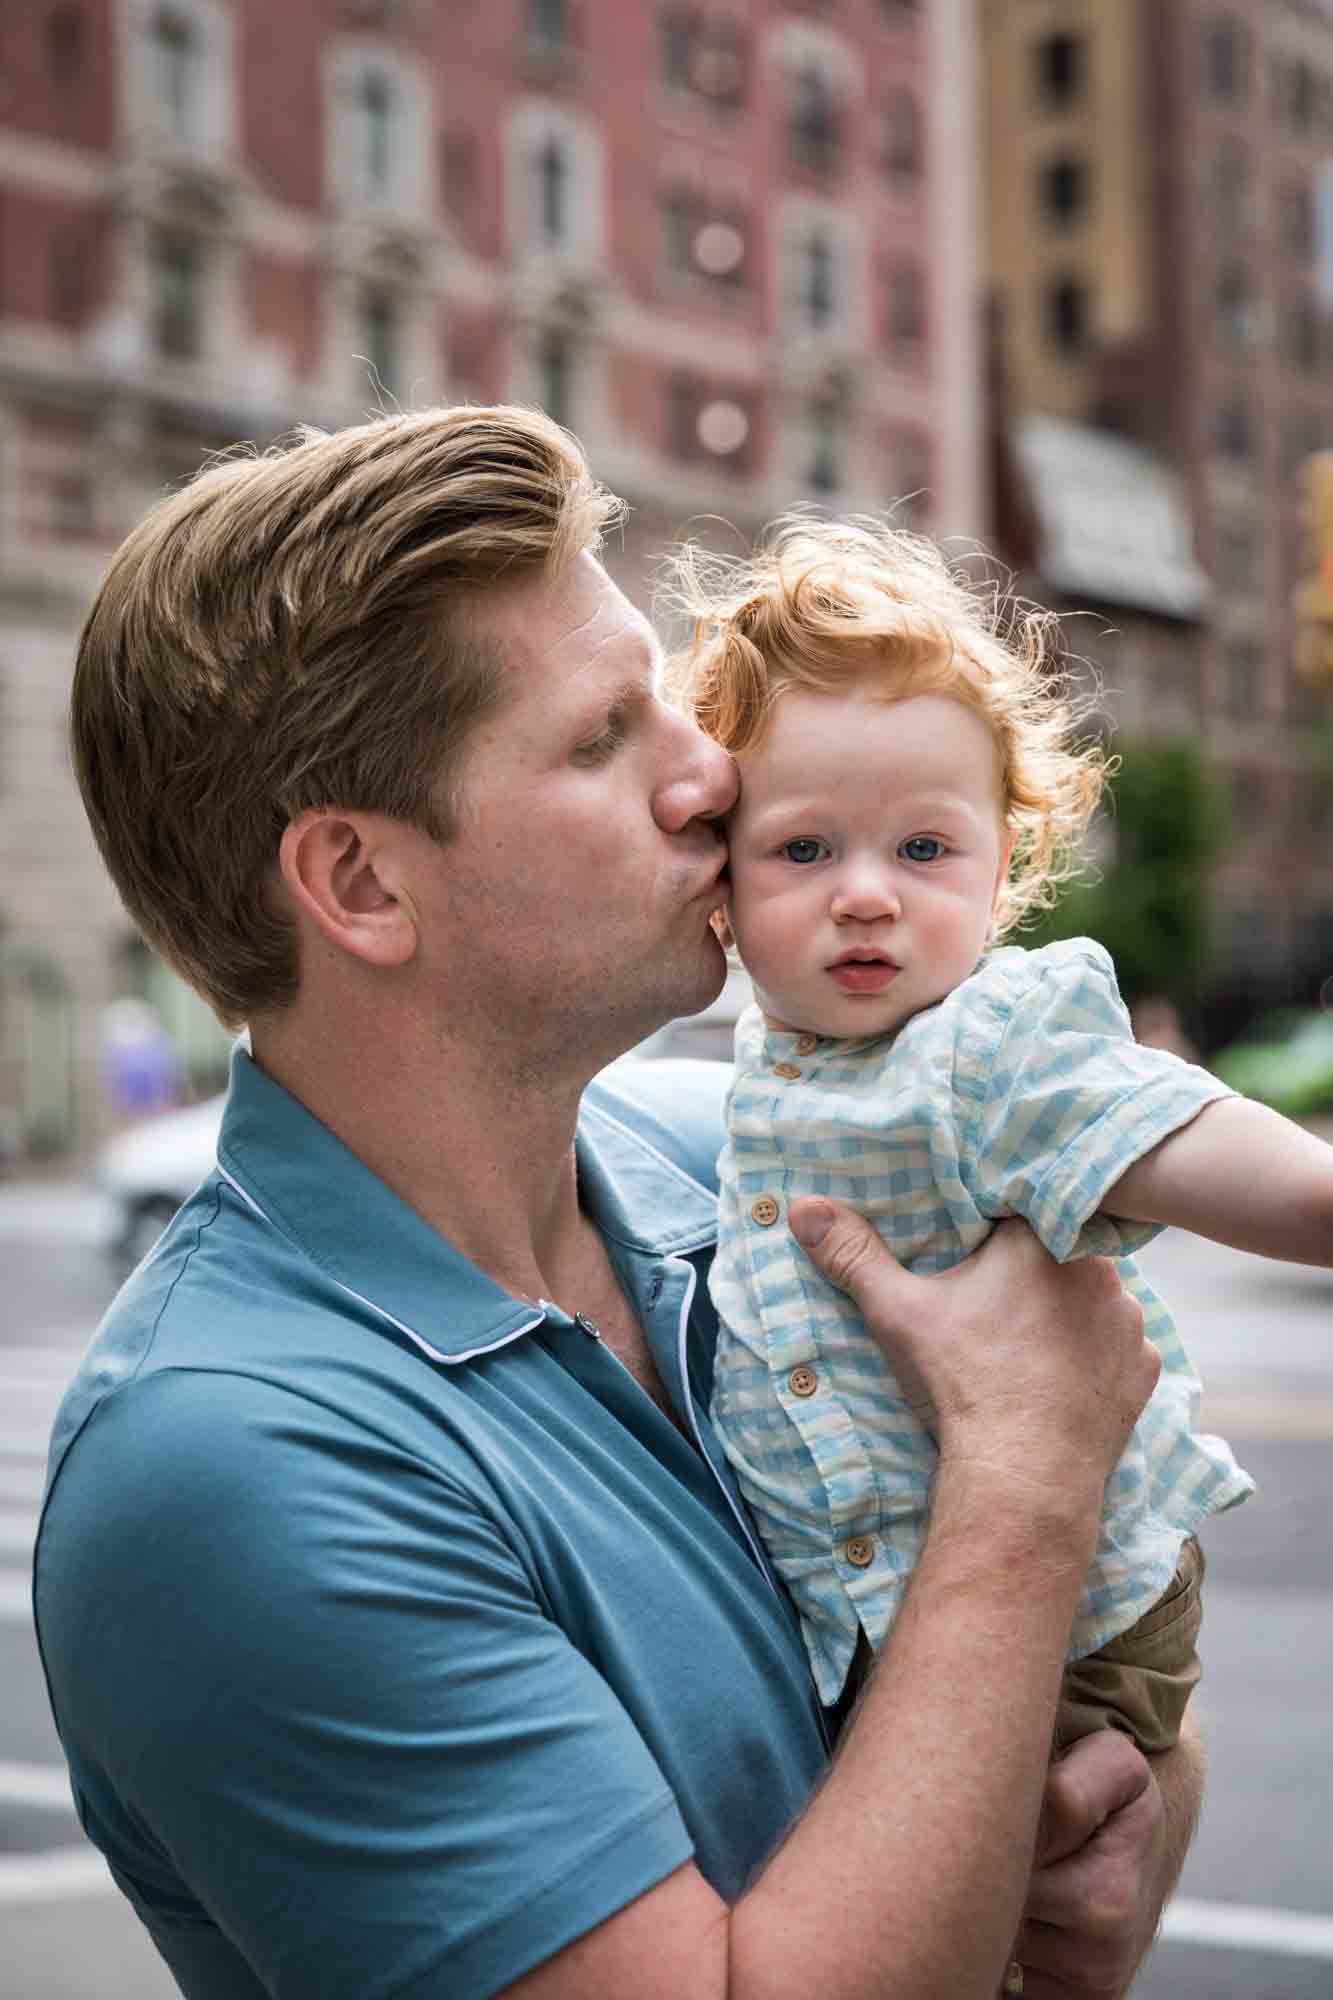 Father wearing blue shirt kissing red-haired baby boy on the side of the head